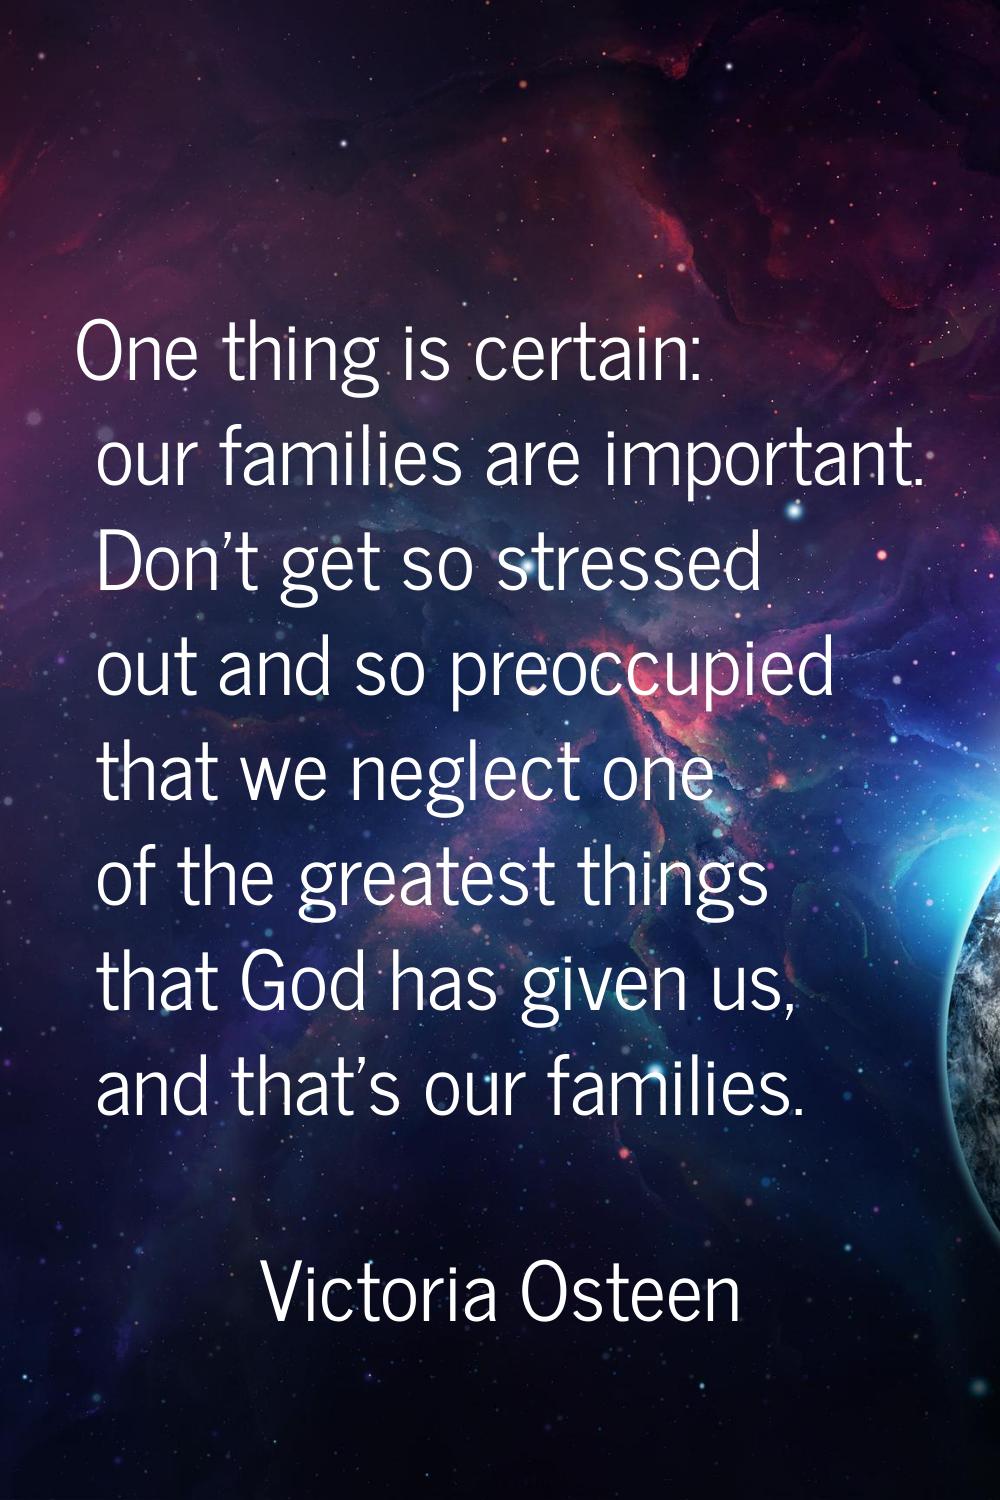 One thing is certain: our families are important. Don't get so stressed out and so preoccupied that